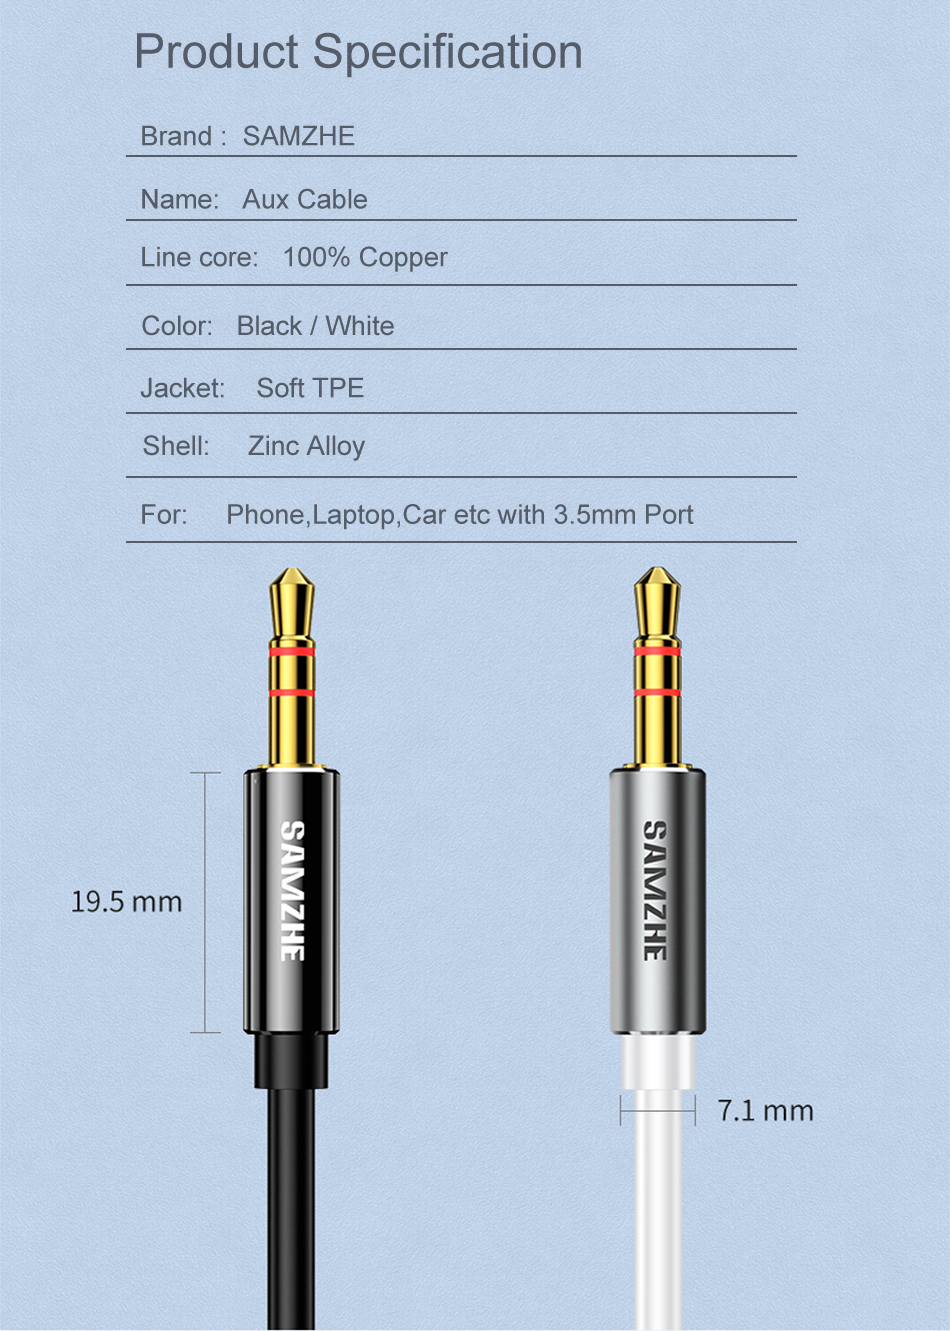 SAMZHE-AUX-Cable-35mm-Audio-Cable-35-mm-Jack-Speaker-Cable-for-Headphone-Laptop-Music-Player-Phone-1760666-11